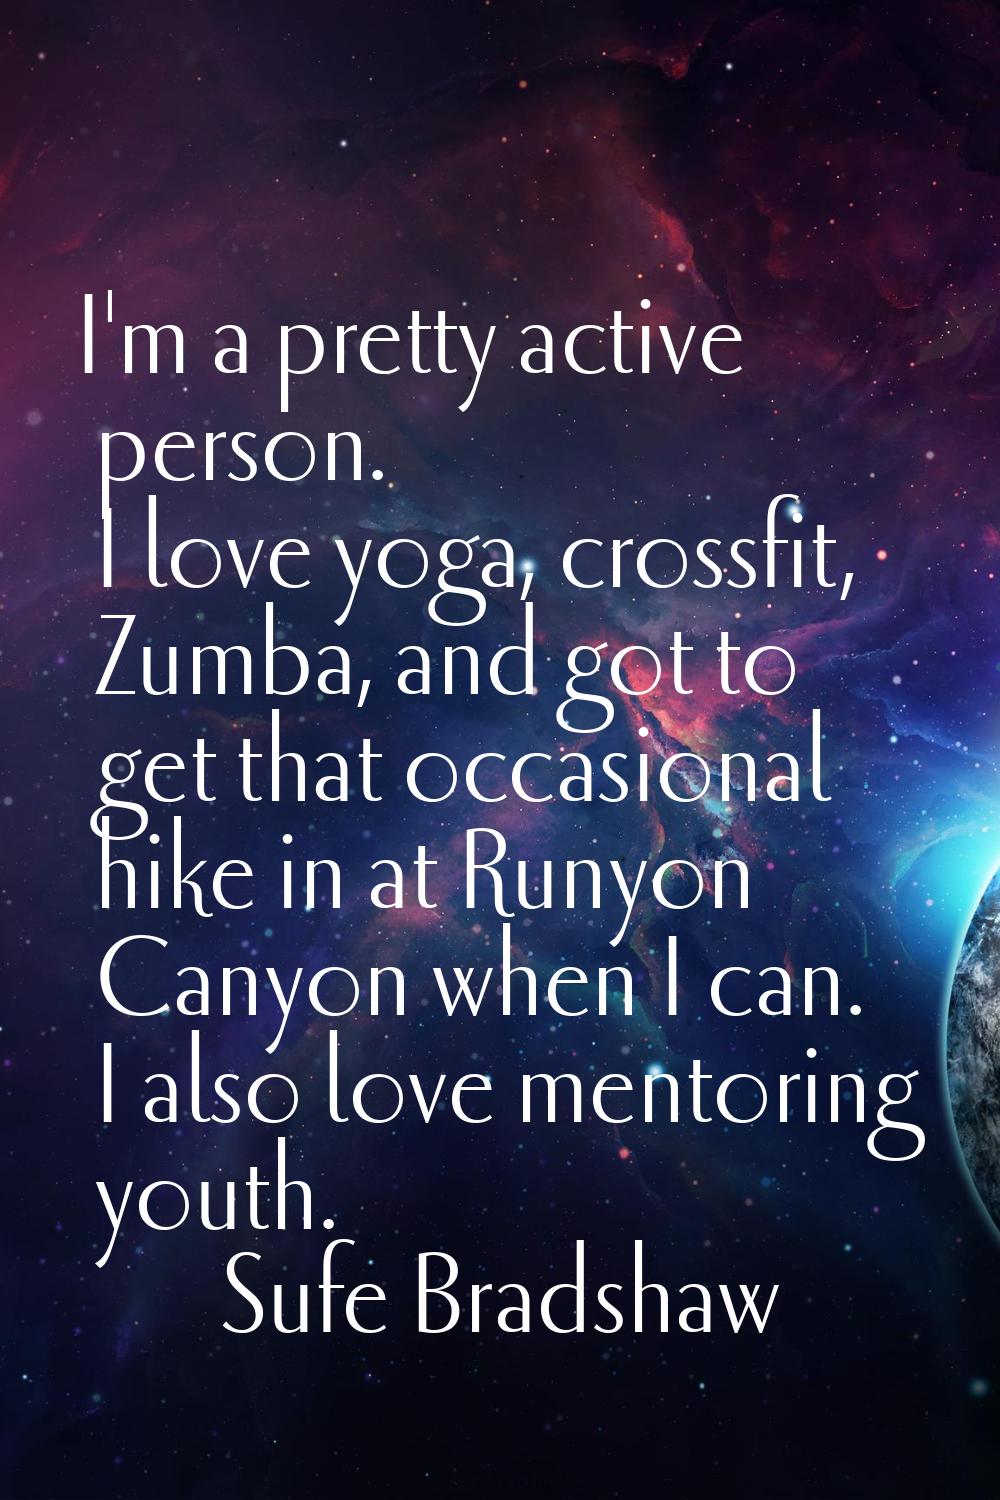 I'm a pretty active person. I love yoga, crossfit, Zumba, and got to get that occasional hike in at